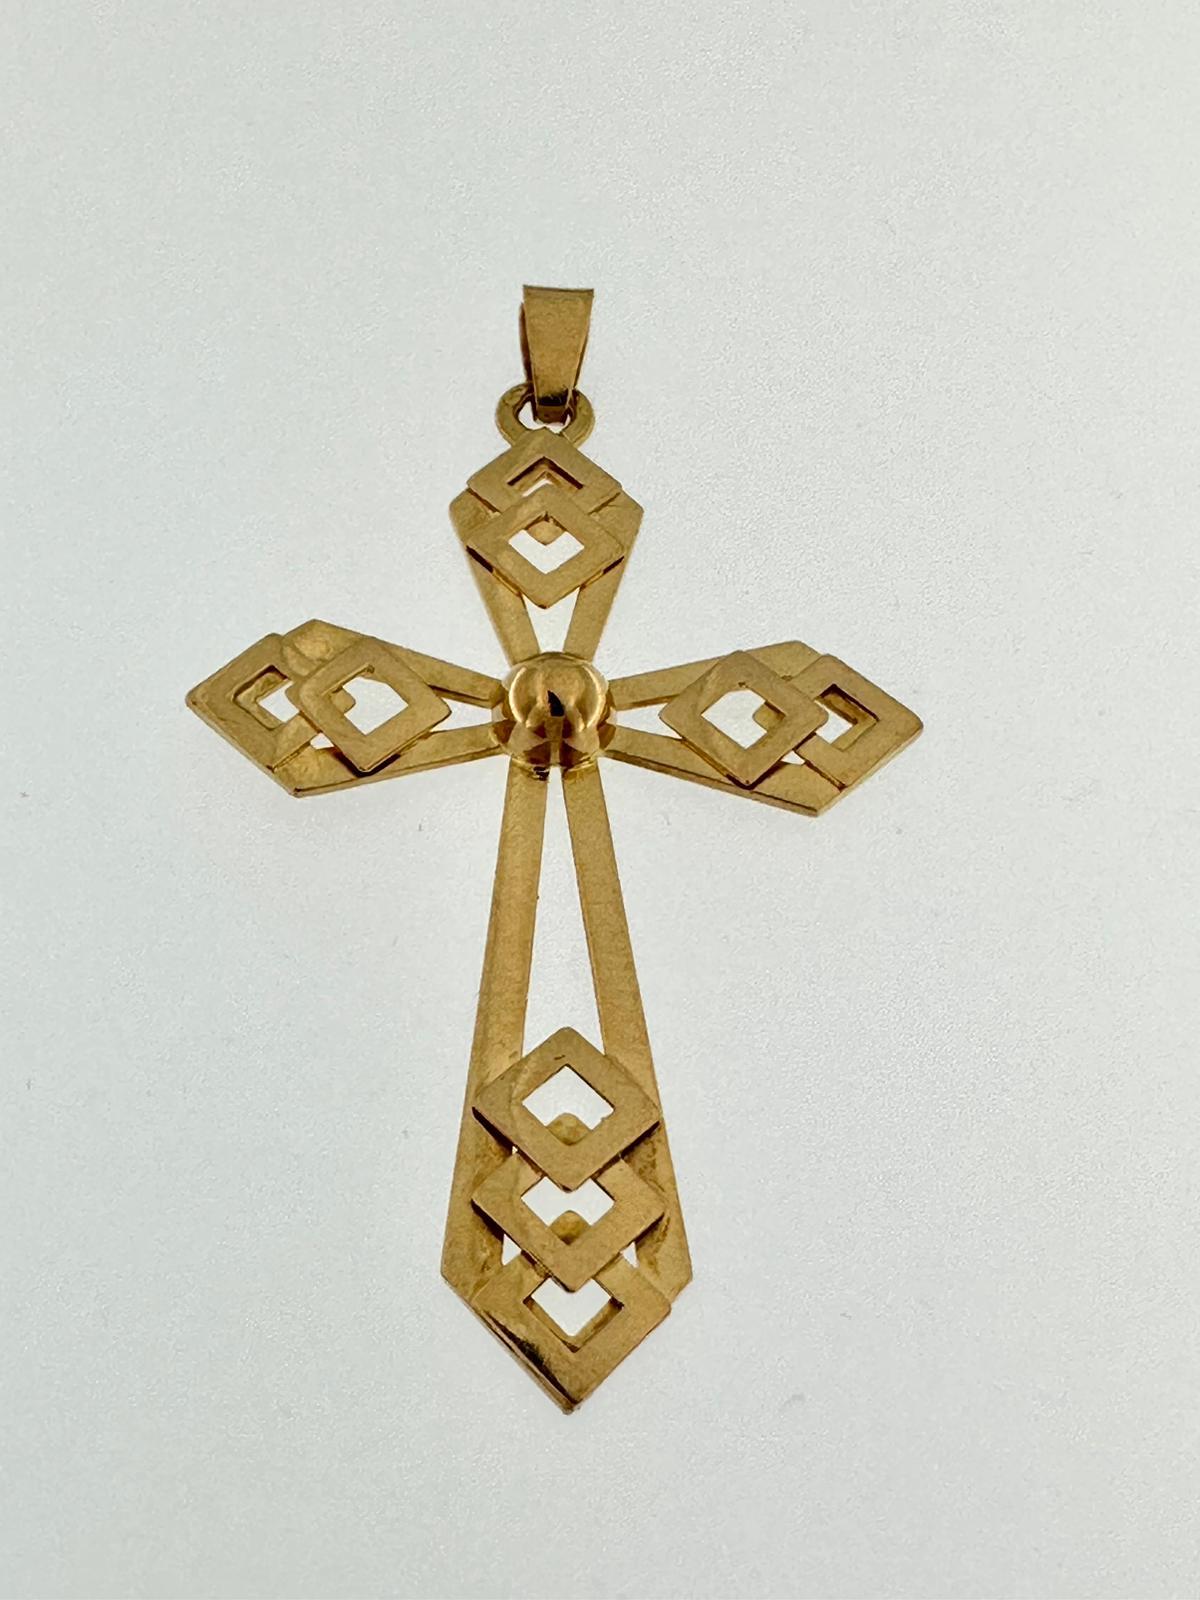 This antique French Cross was manufactured in the mid-20th century. Entirely in Yellow Gold, has the Eagle head hallmark which is the french hallmark for 18kt Gold. The technique used is similar to that of granulation, but in this case geometric